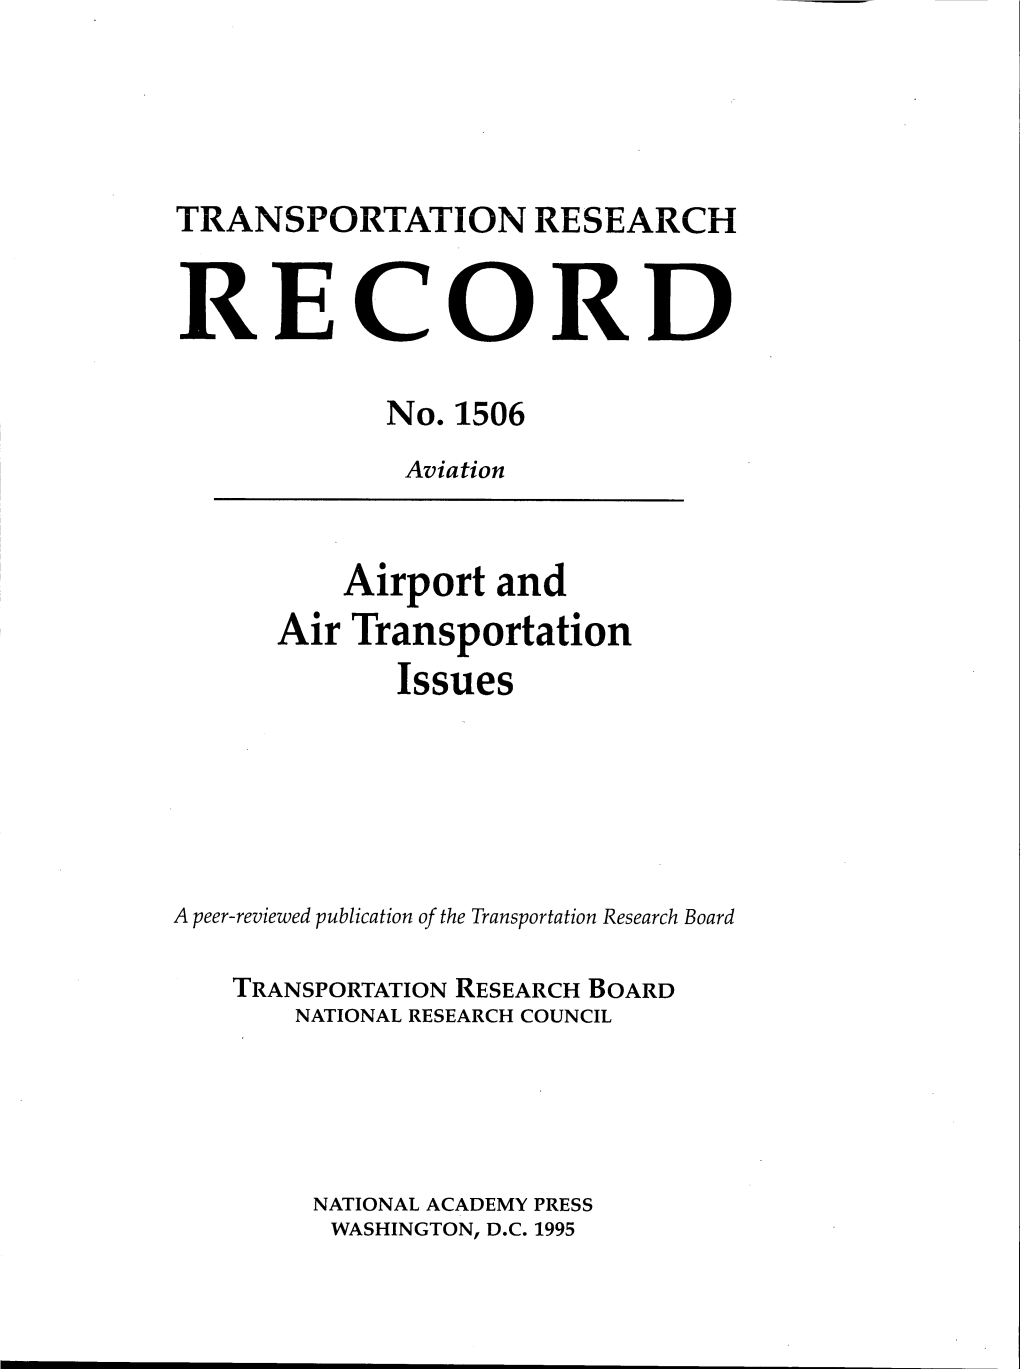 Airport and Air Transportation Issues